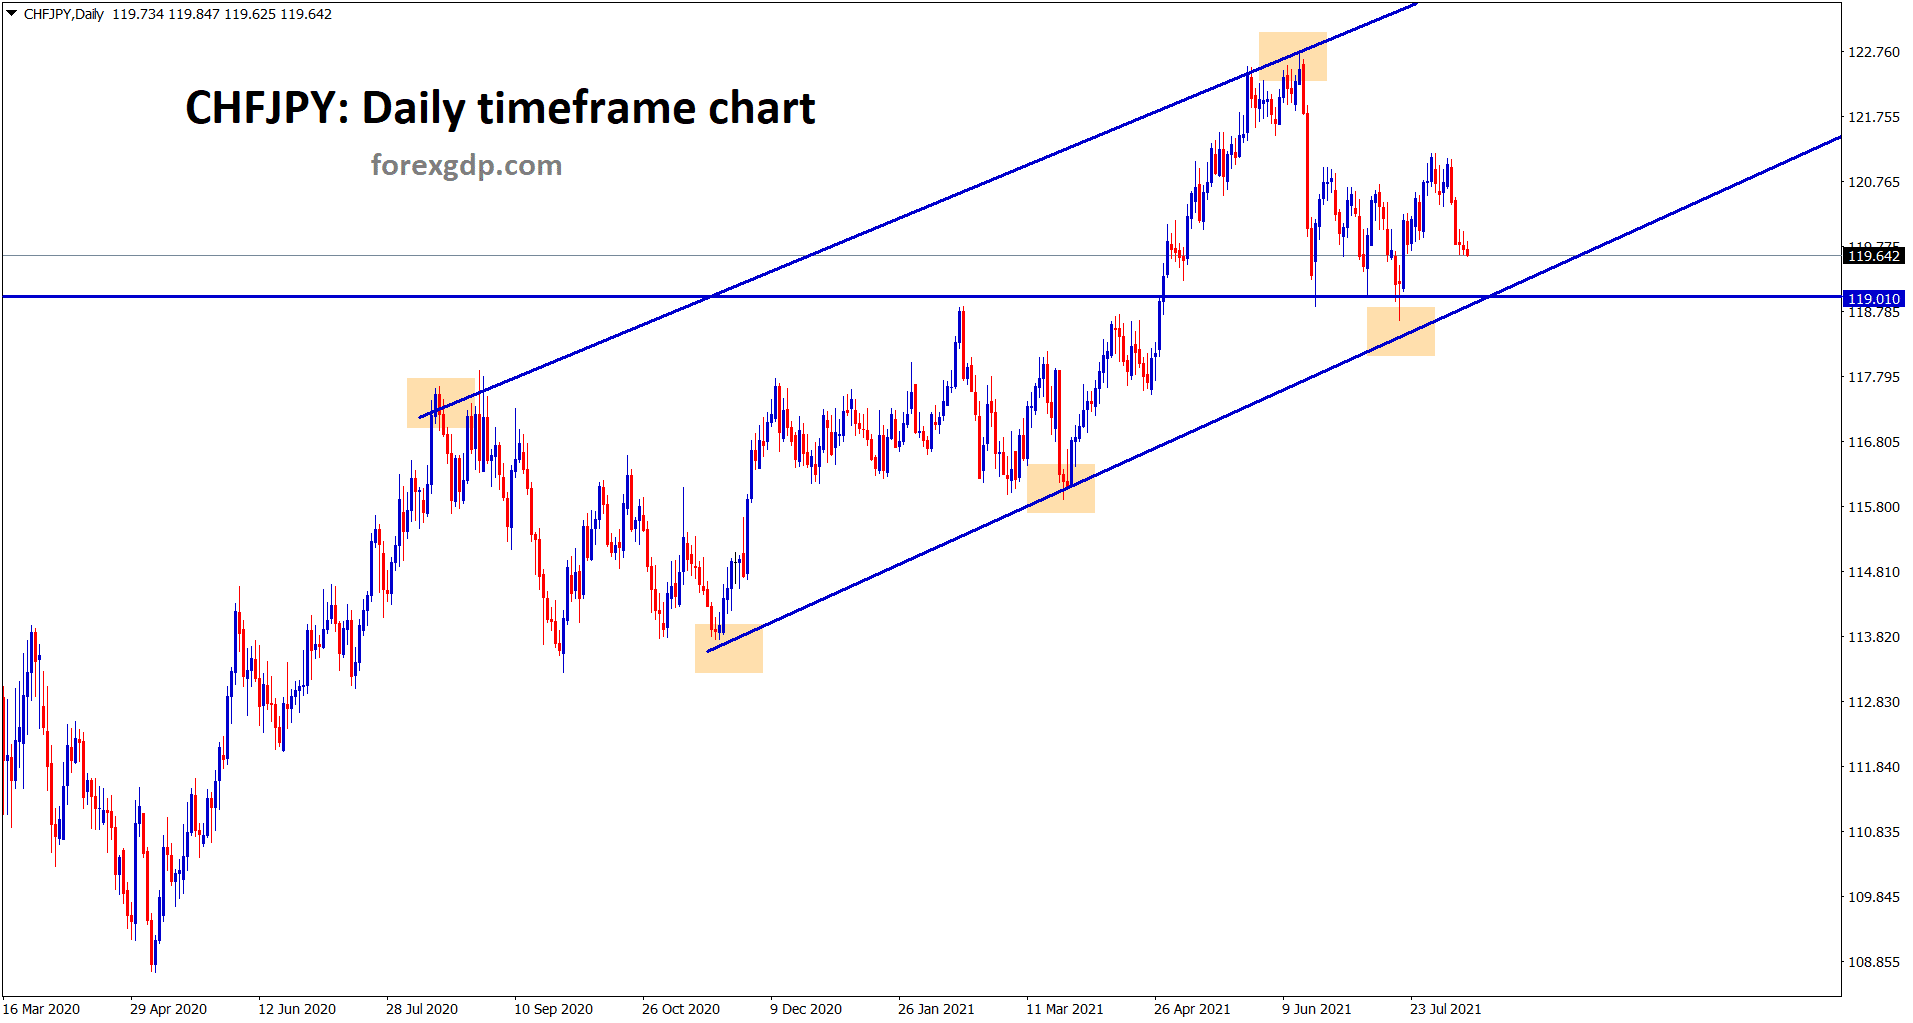 CHFJPY is moving in an ascending channel however market is now heading to the higher low again for the fourth time